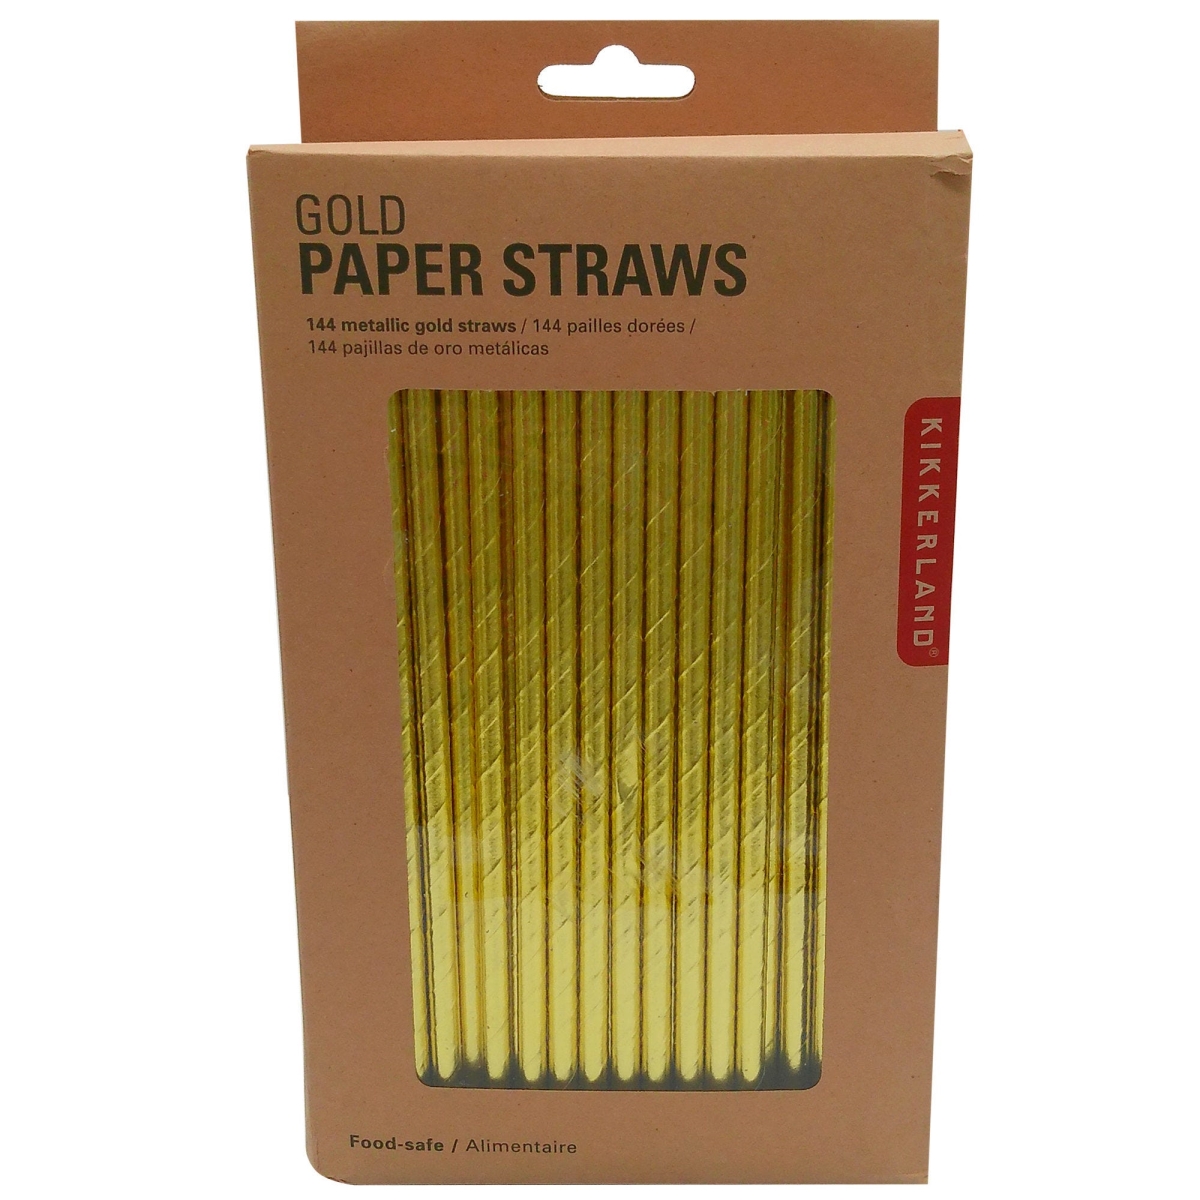 Picture of Kole Imports AH304 Kikkerland Paper Straws in Gold - Set of 144 - Pack of 24